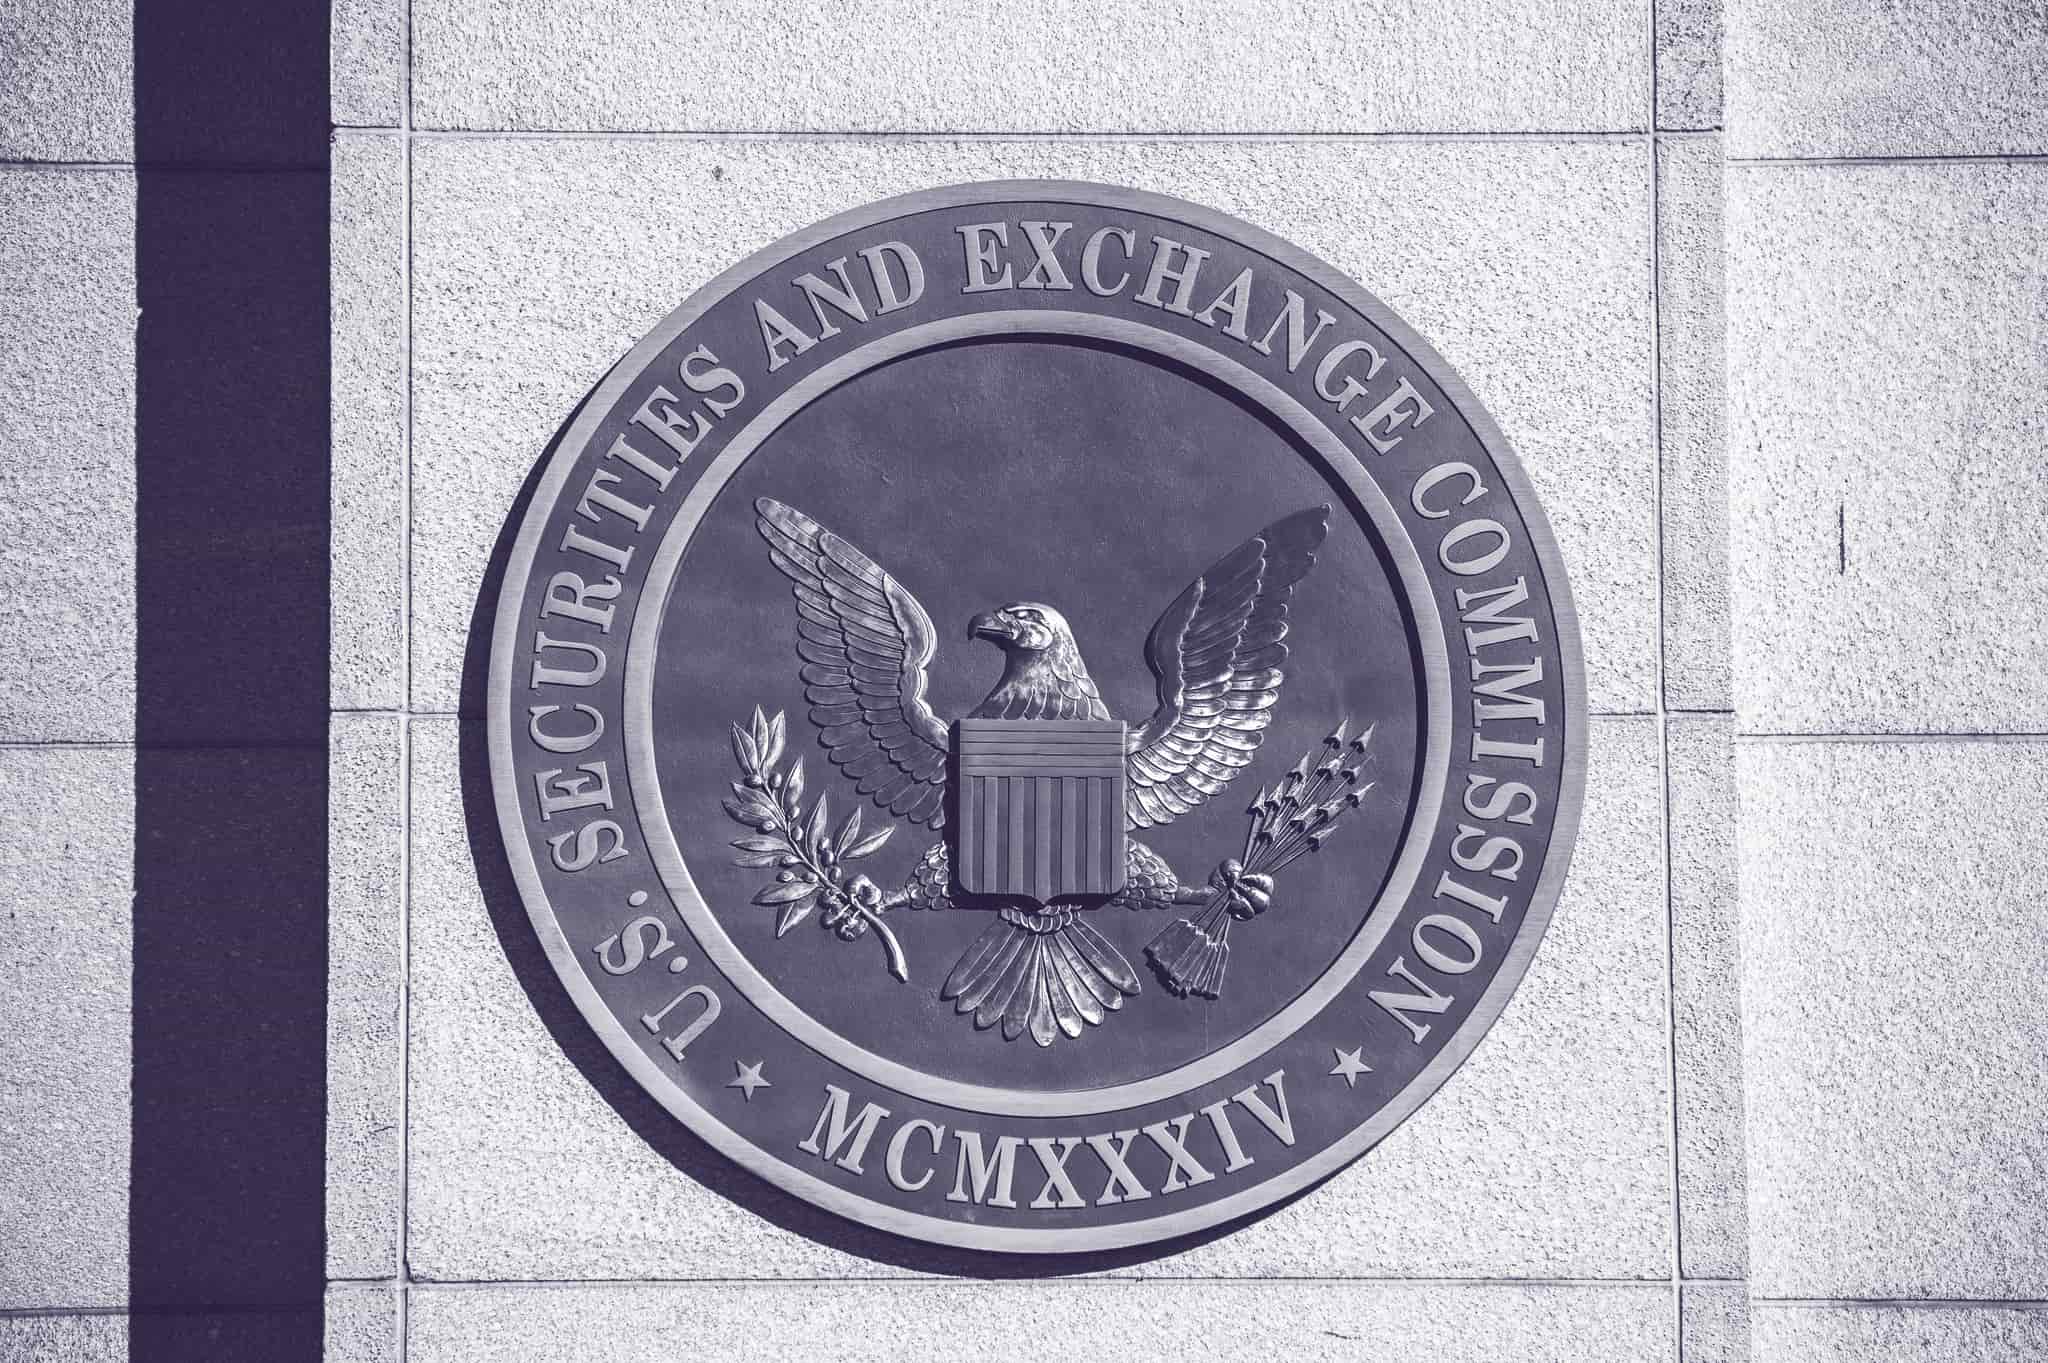 A sign on a building reads "U.S. Securities and Exchange Commission" and displays the seal of the United States.